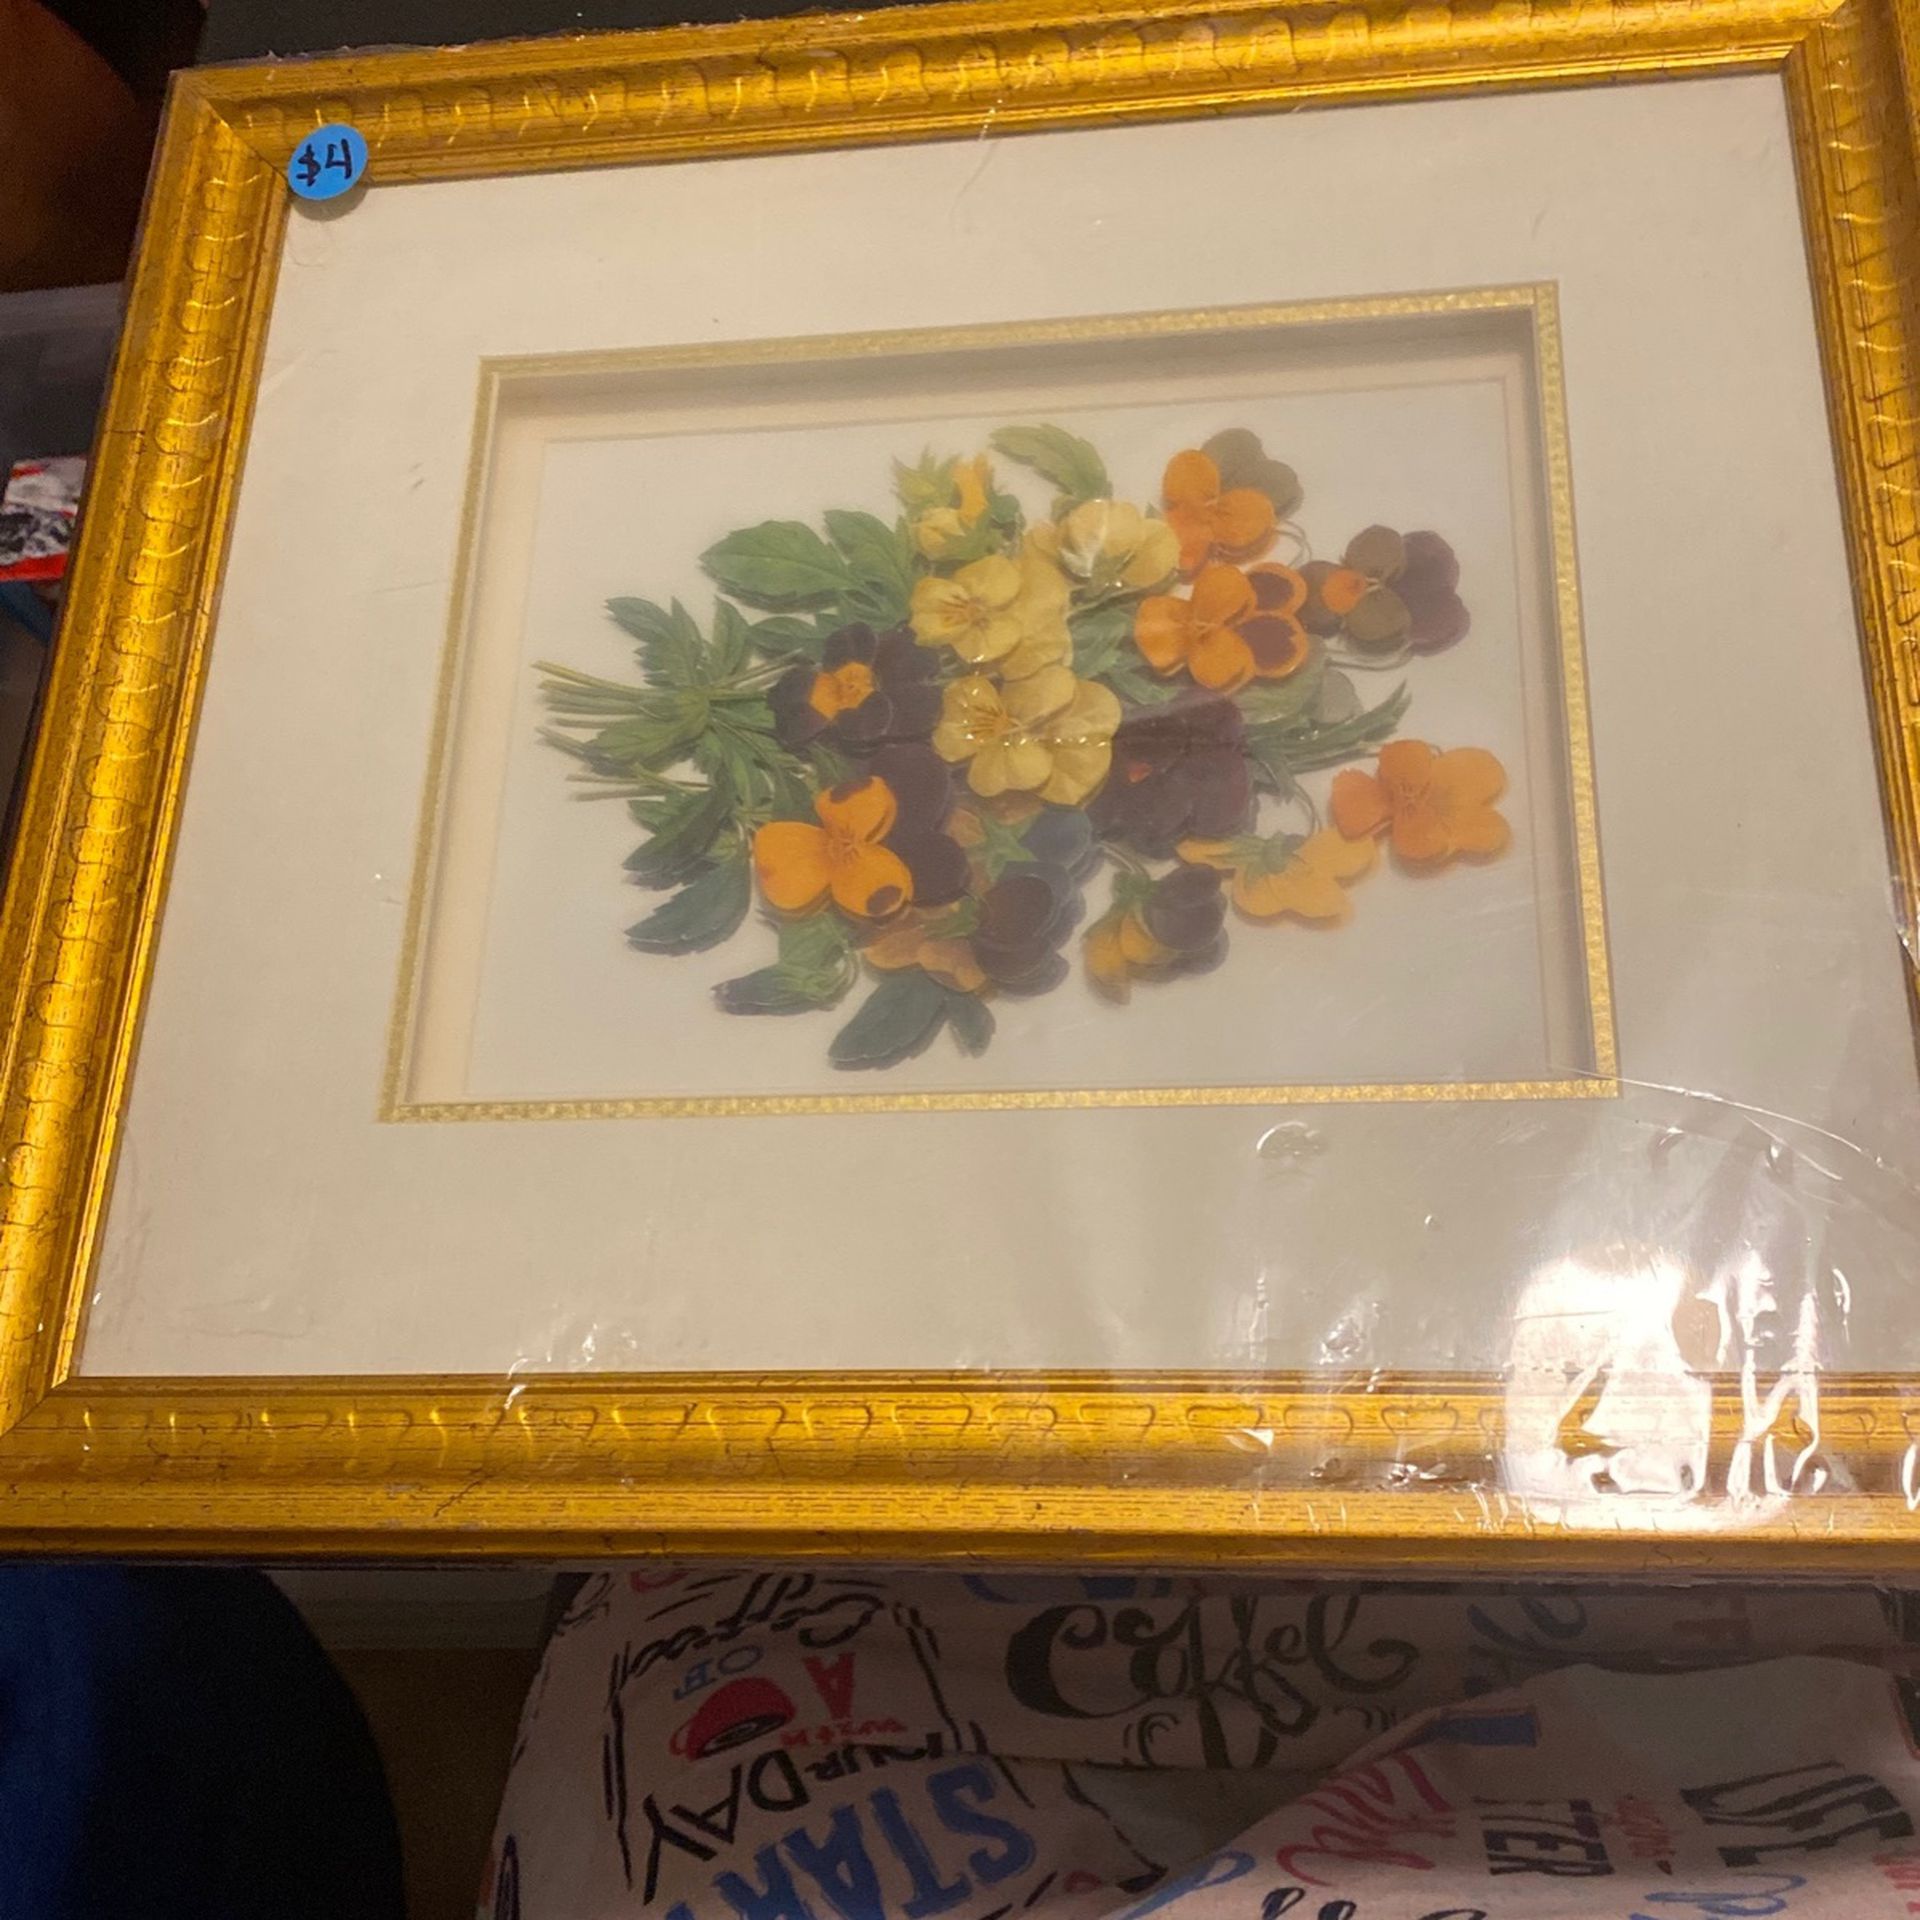 Flower Picture Frame